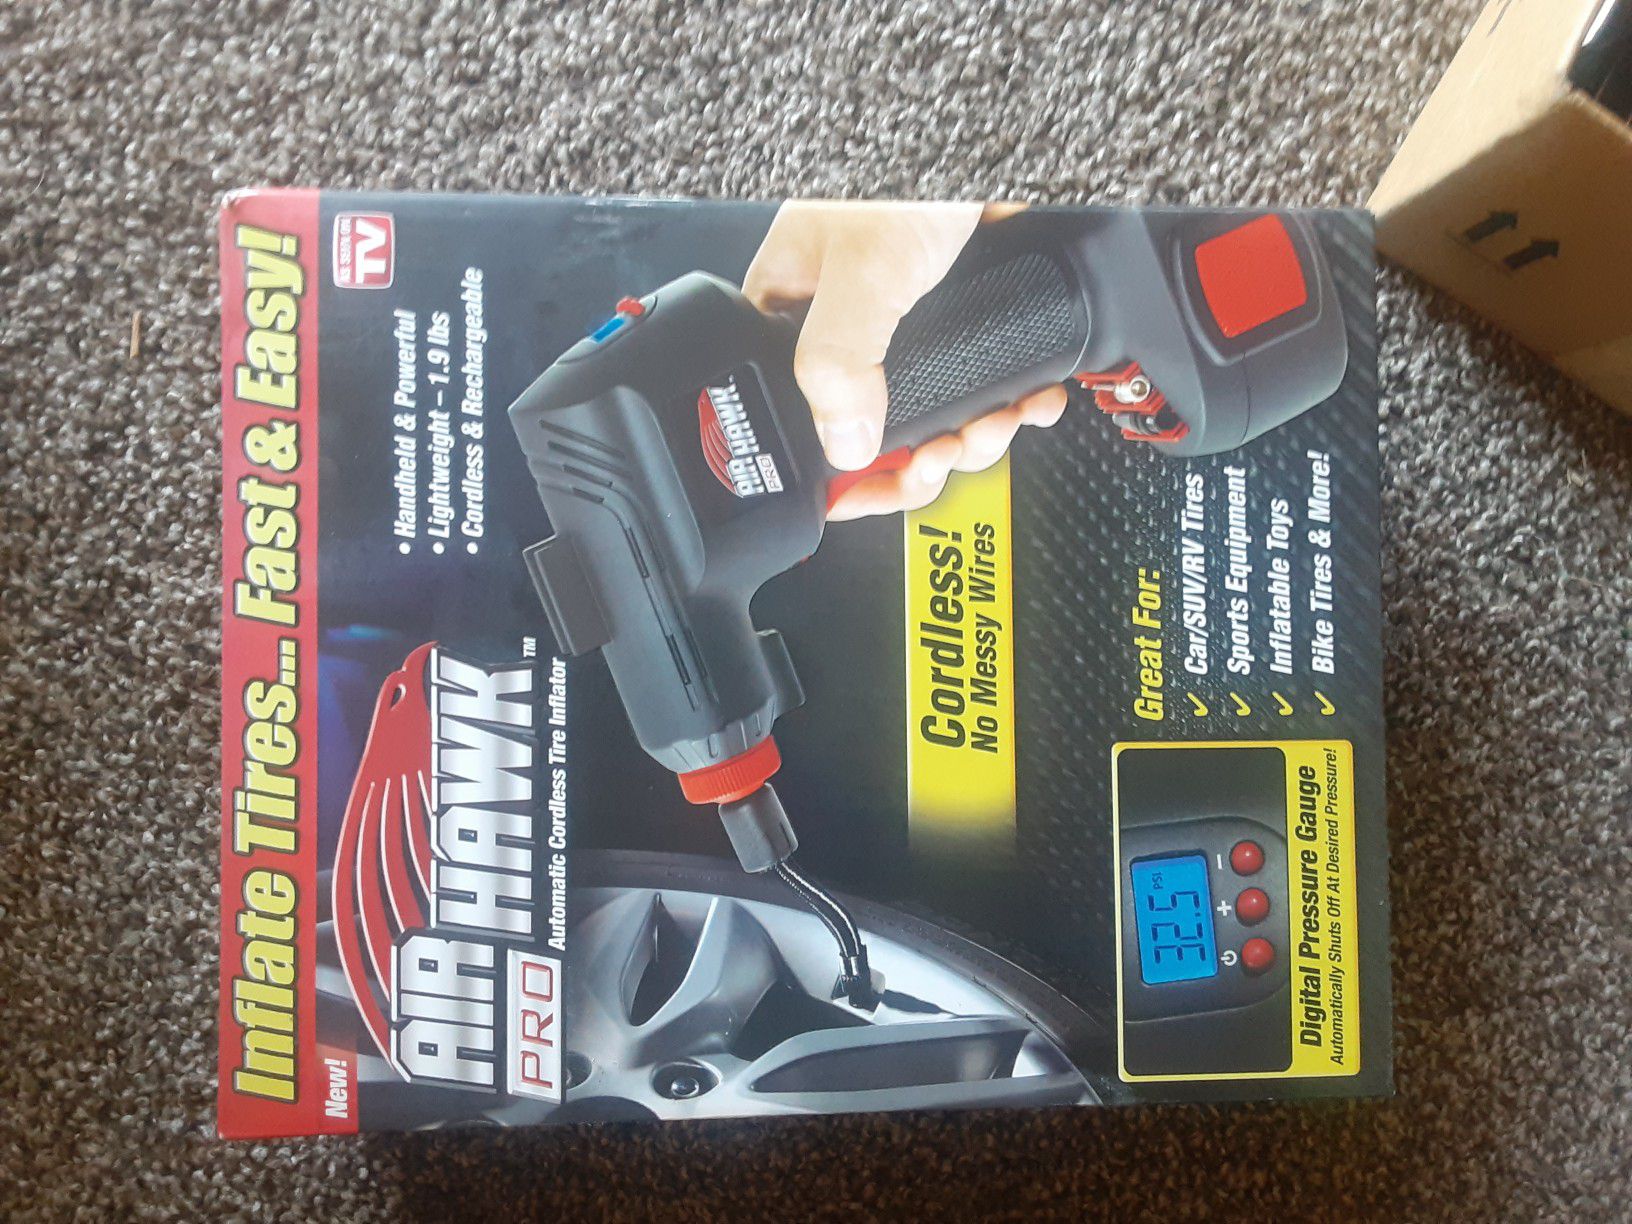 AIR HAWK AIR COMPRESSOR GUN ! Brand NEW ONLY took it out of the box too test it !